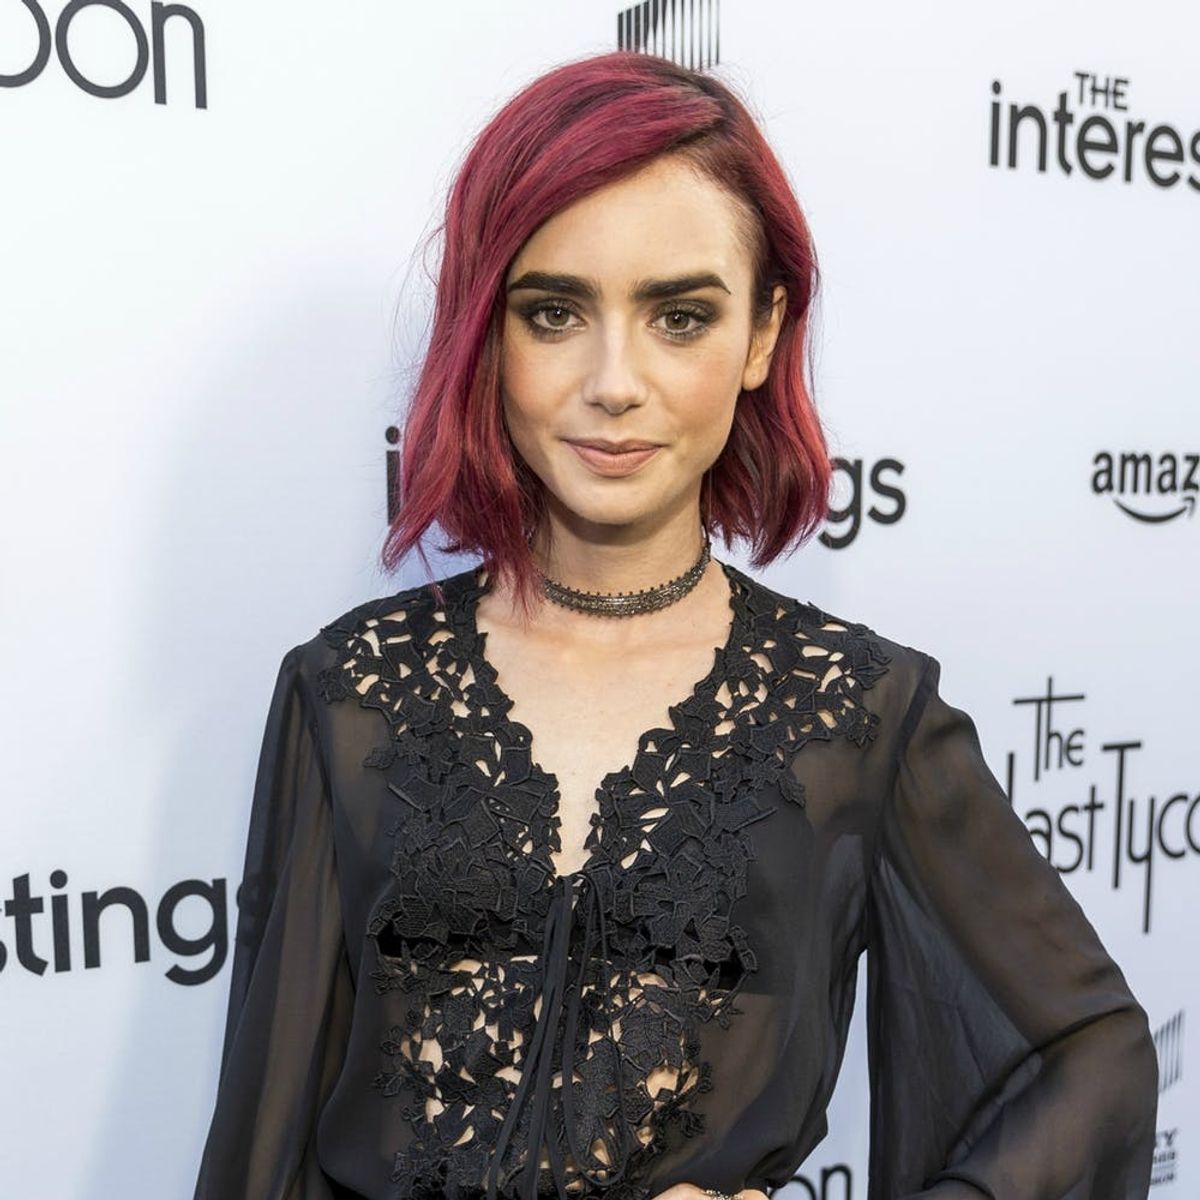 Lily Collins Trades In Her Edgy Red Locks for This Classic Brunette Hue